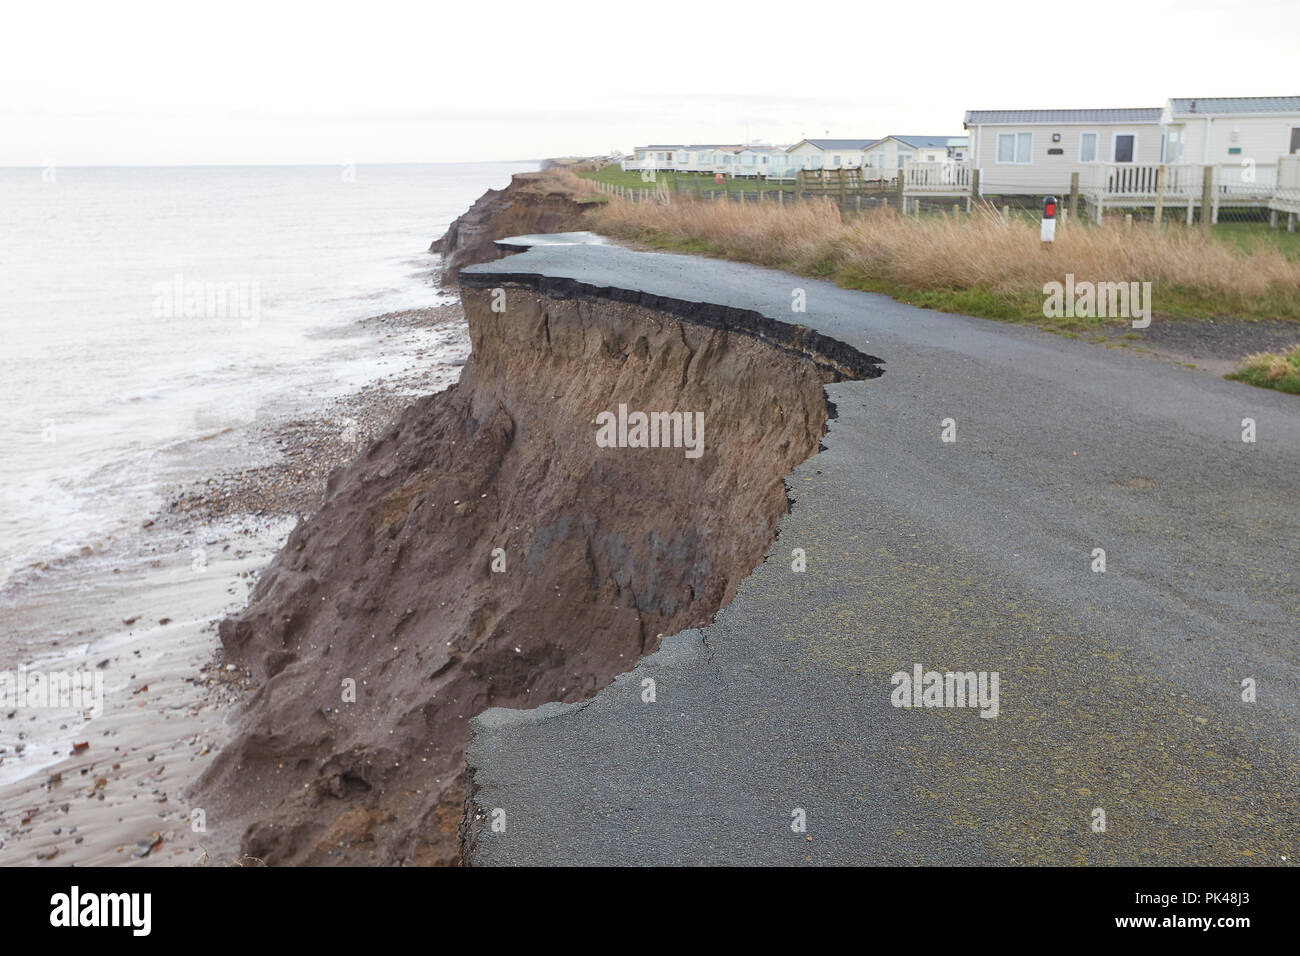 End of the road. Coastal Erosion cliffs, caravans and road collapsing into the North Sea, Ulrome, Skipsea, East Riding of Yorkshire, England, UK Stock Photo